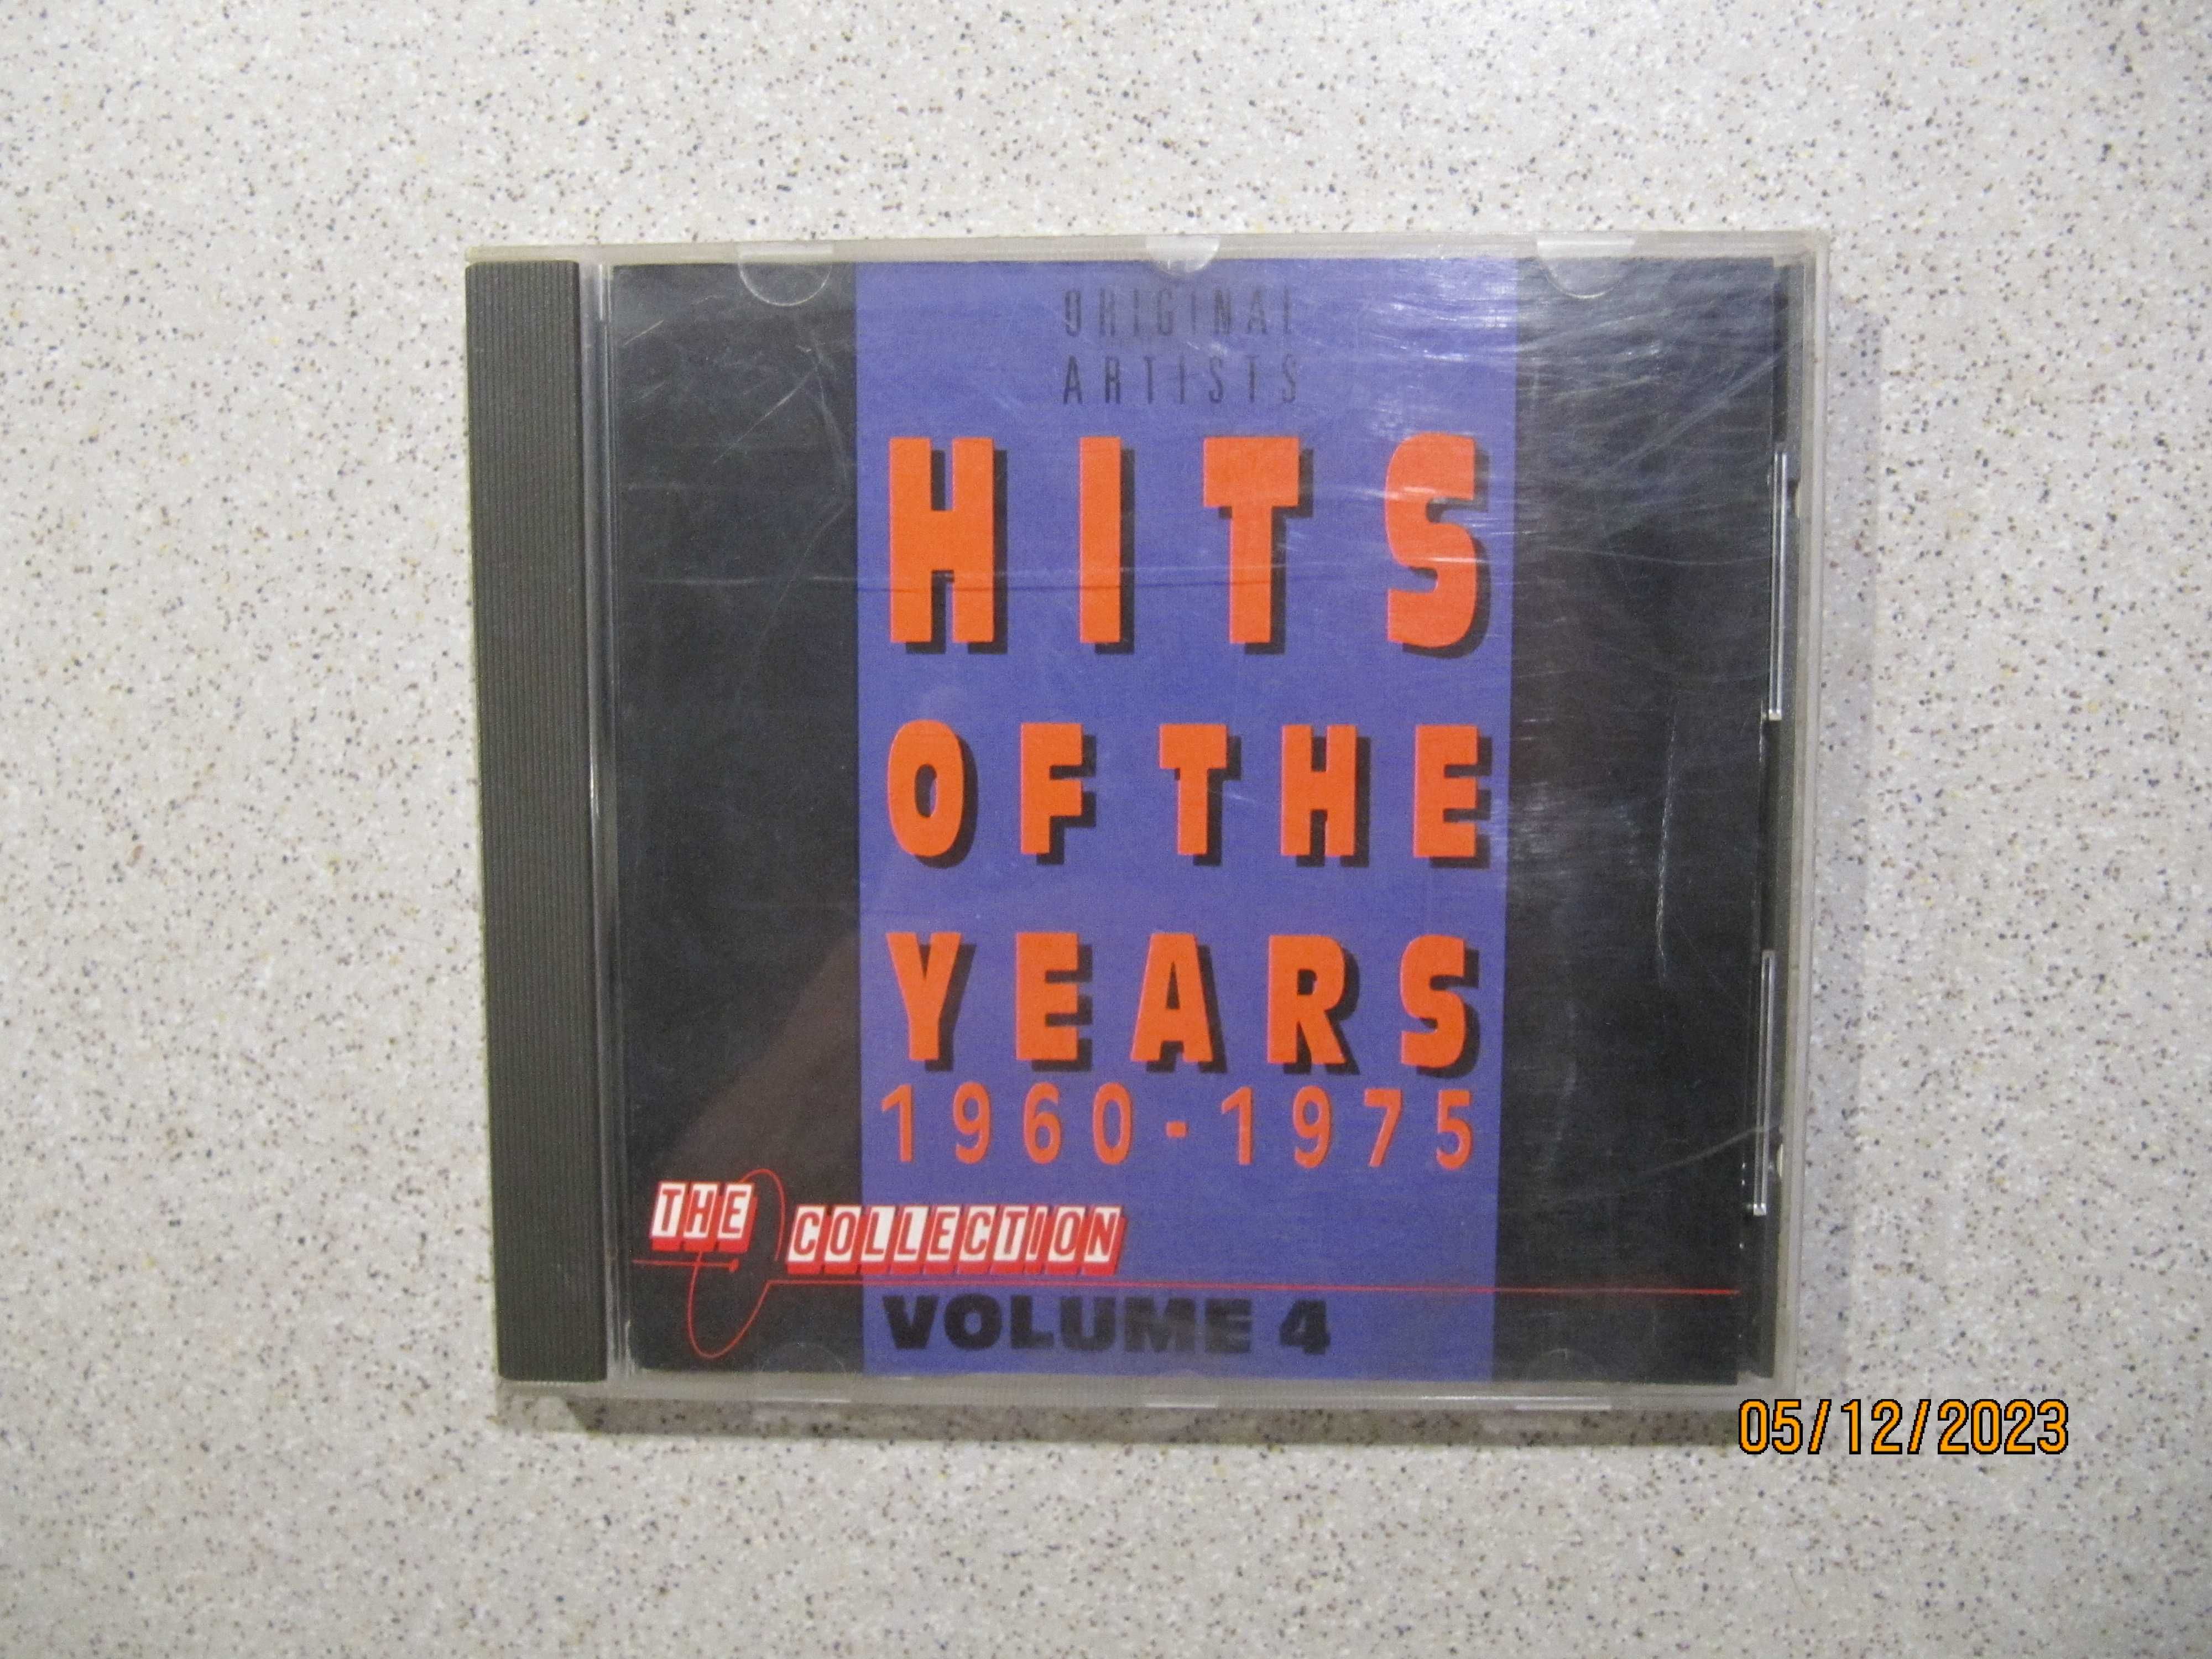 CD - Hits Of The Years 1960 - 1975 Volume 4 - 1989